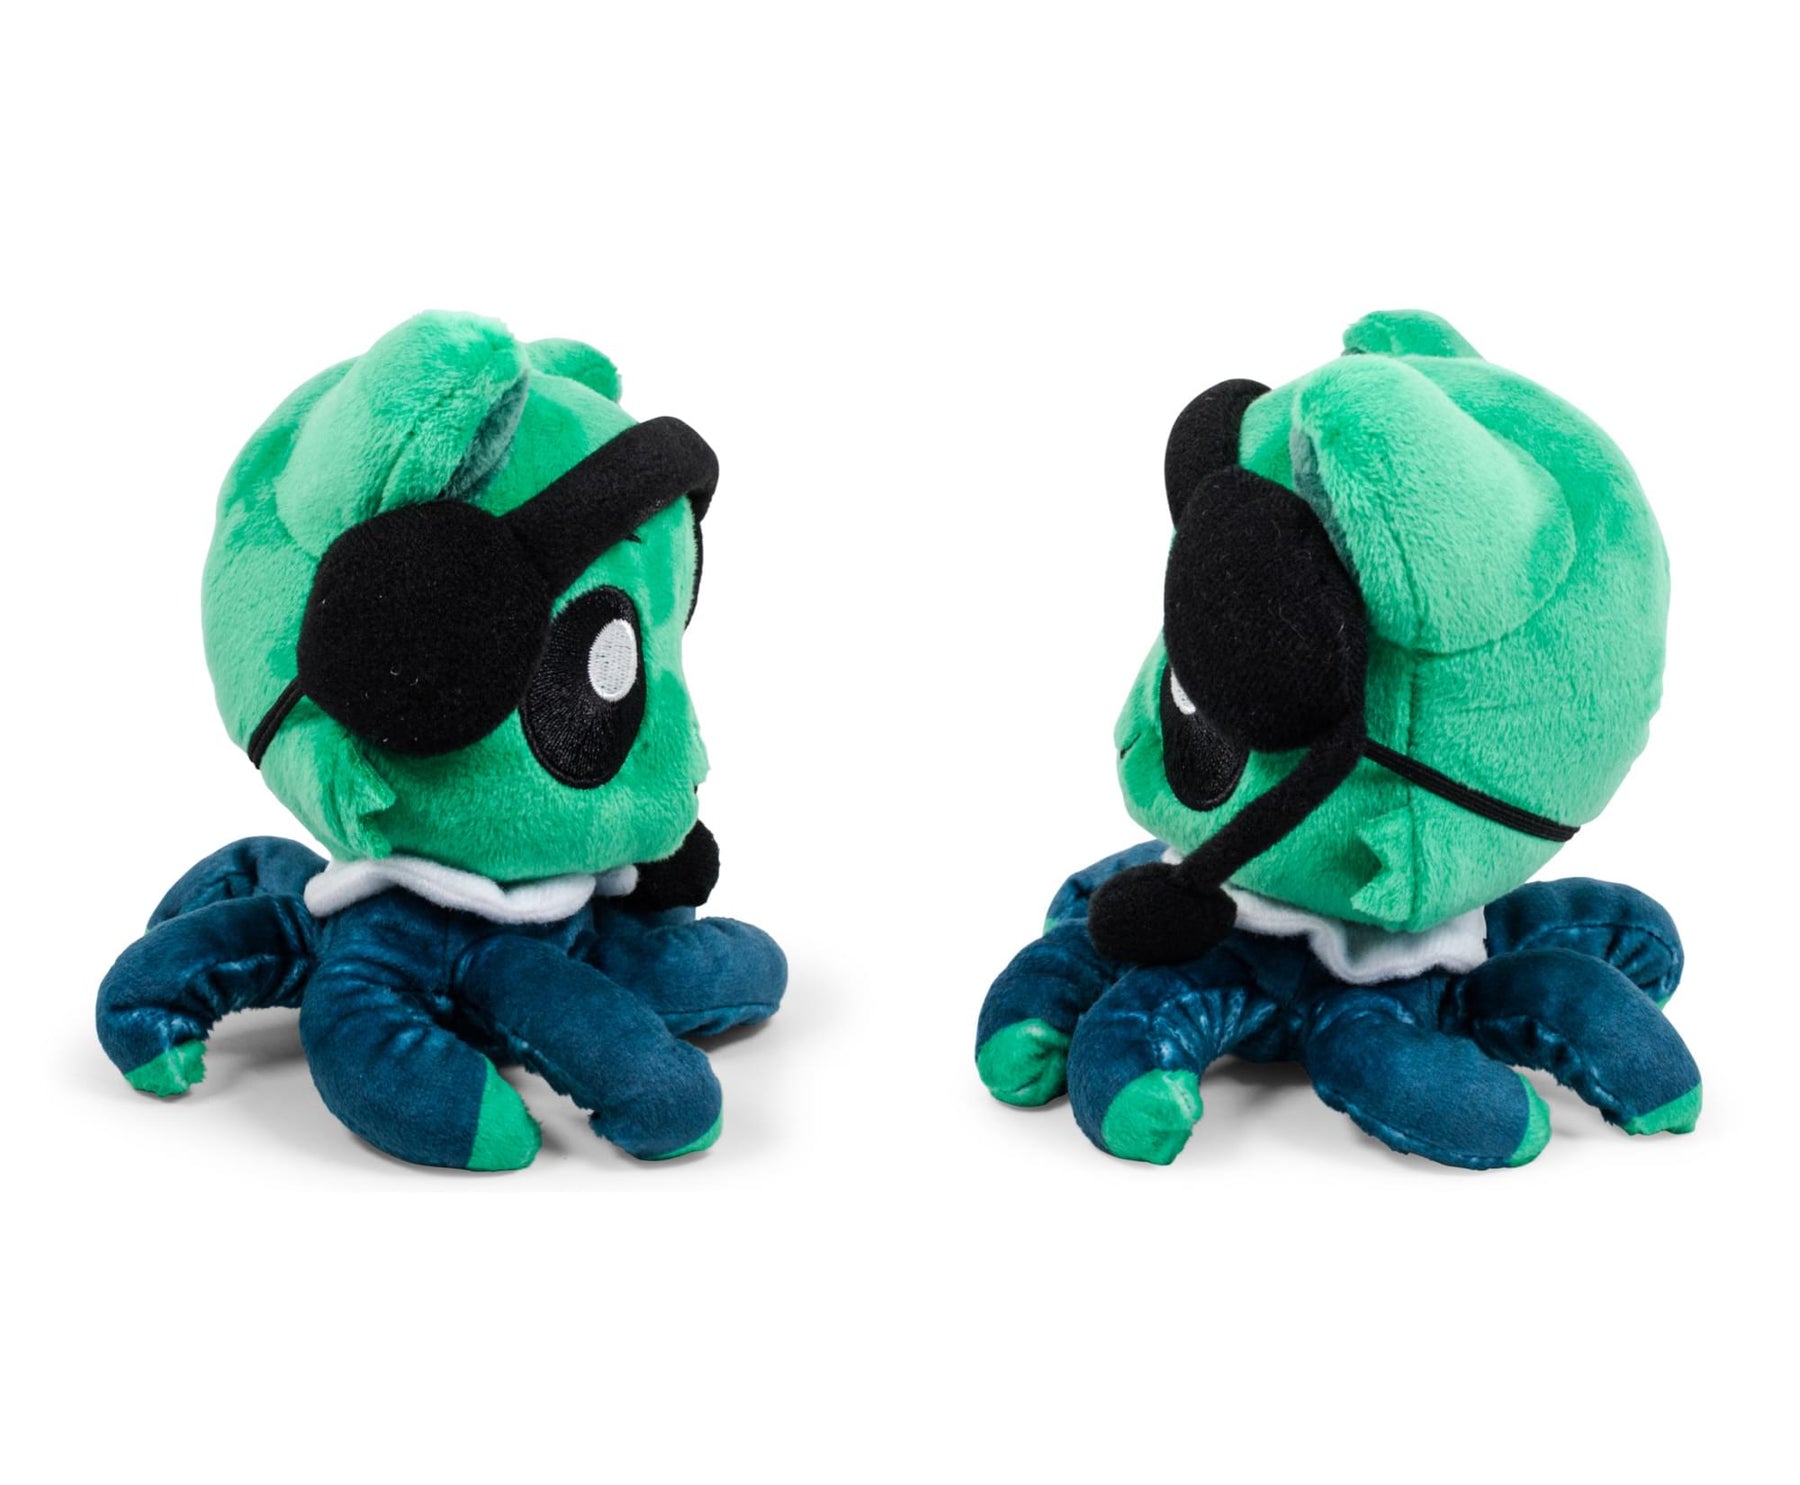 Tentacle Kitty First Responders & Essentials Little Ones Plush | Call-in Kitty